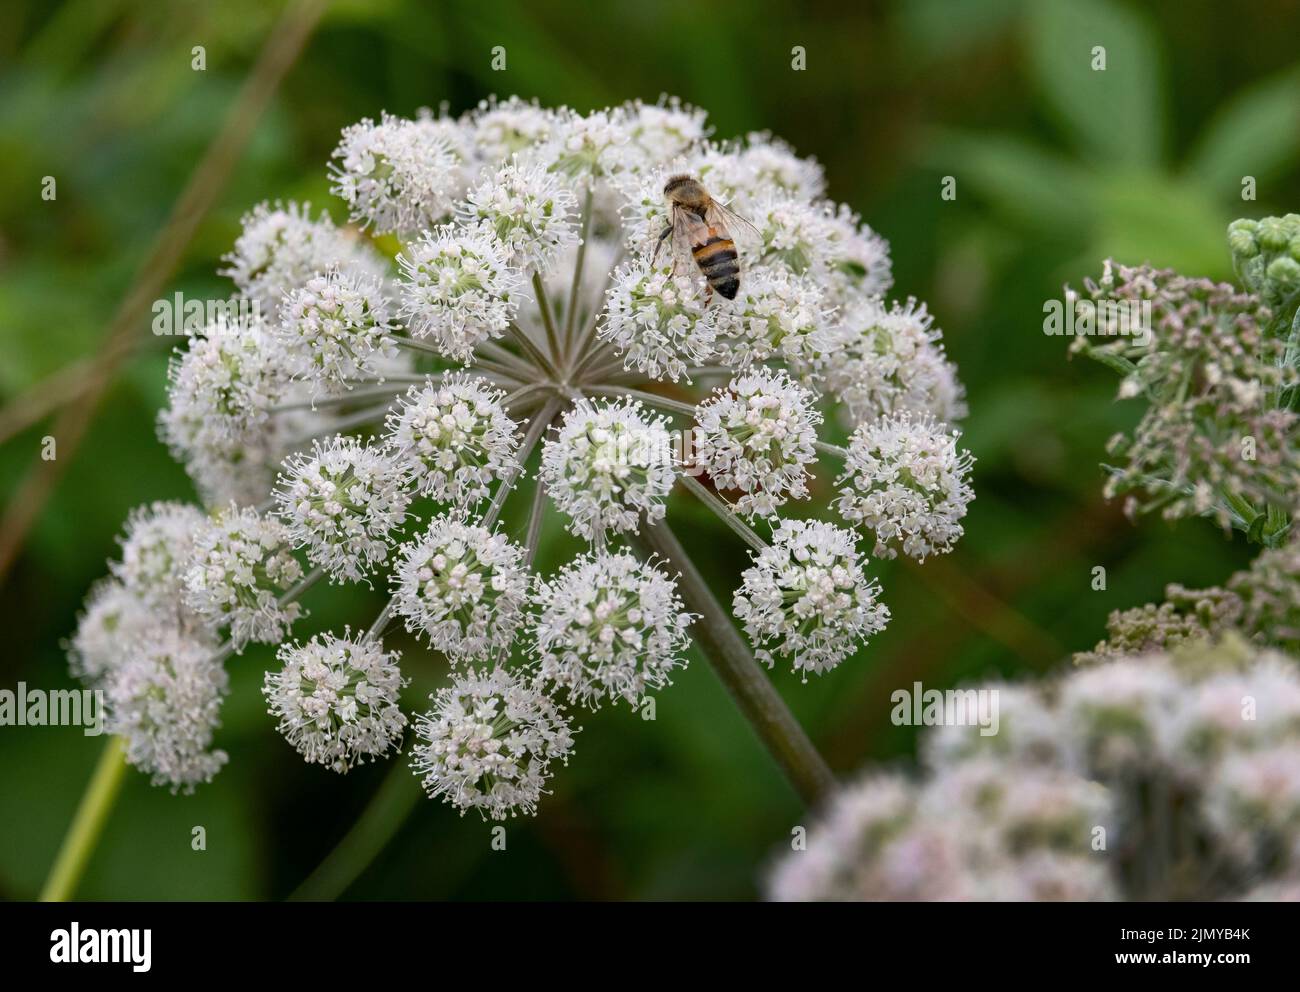 A flowering head of the Wild Angelica plant, Warwickshire, England. Stock Photo